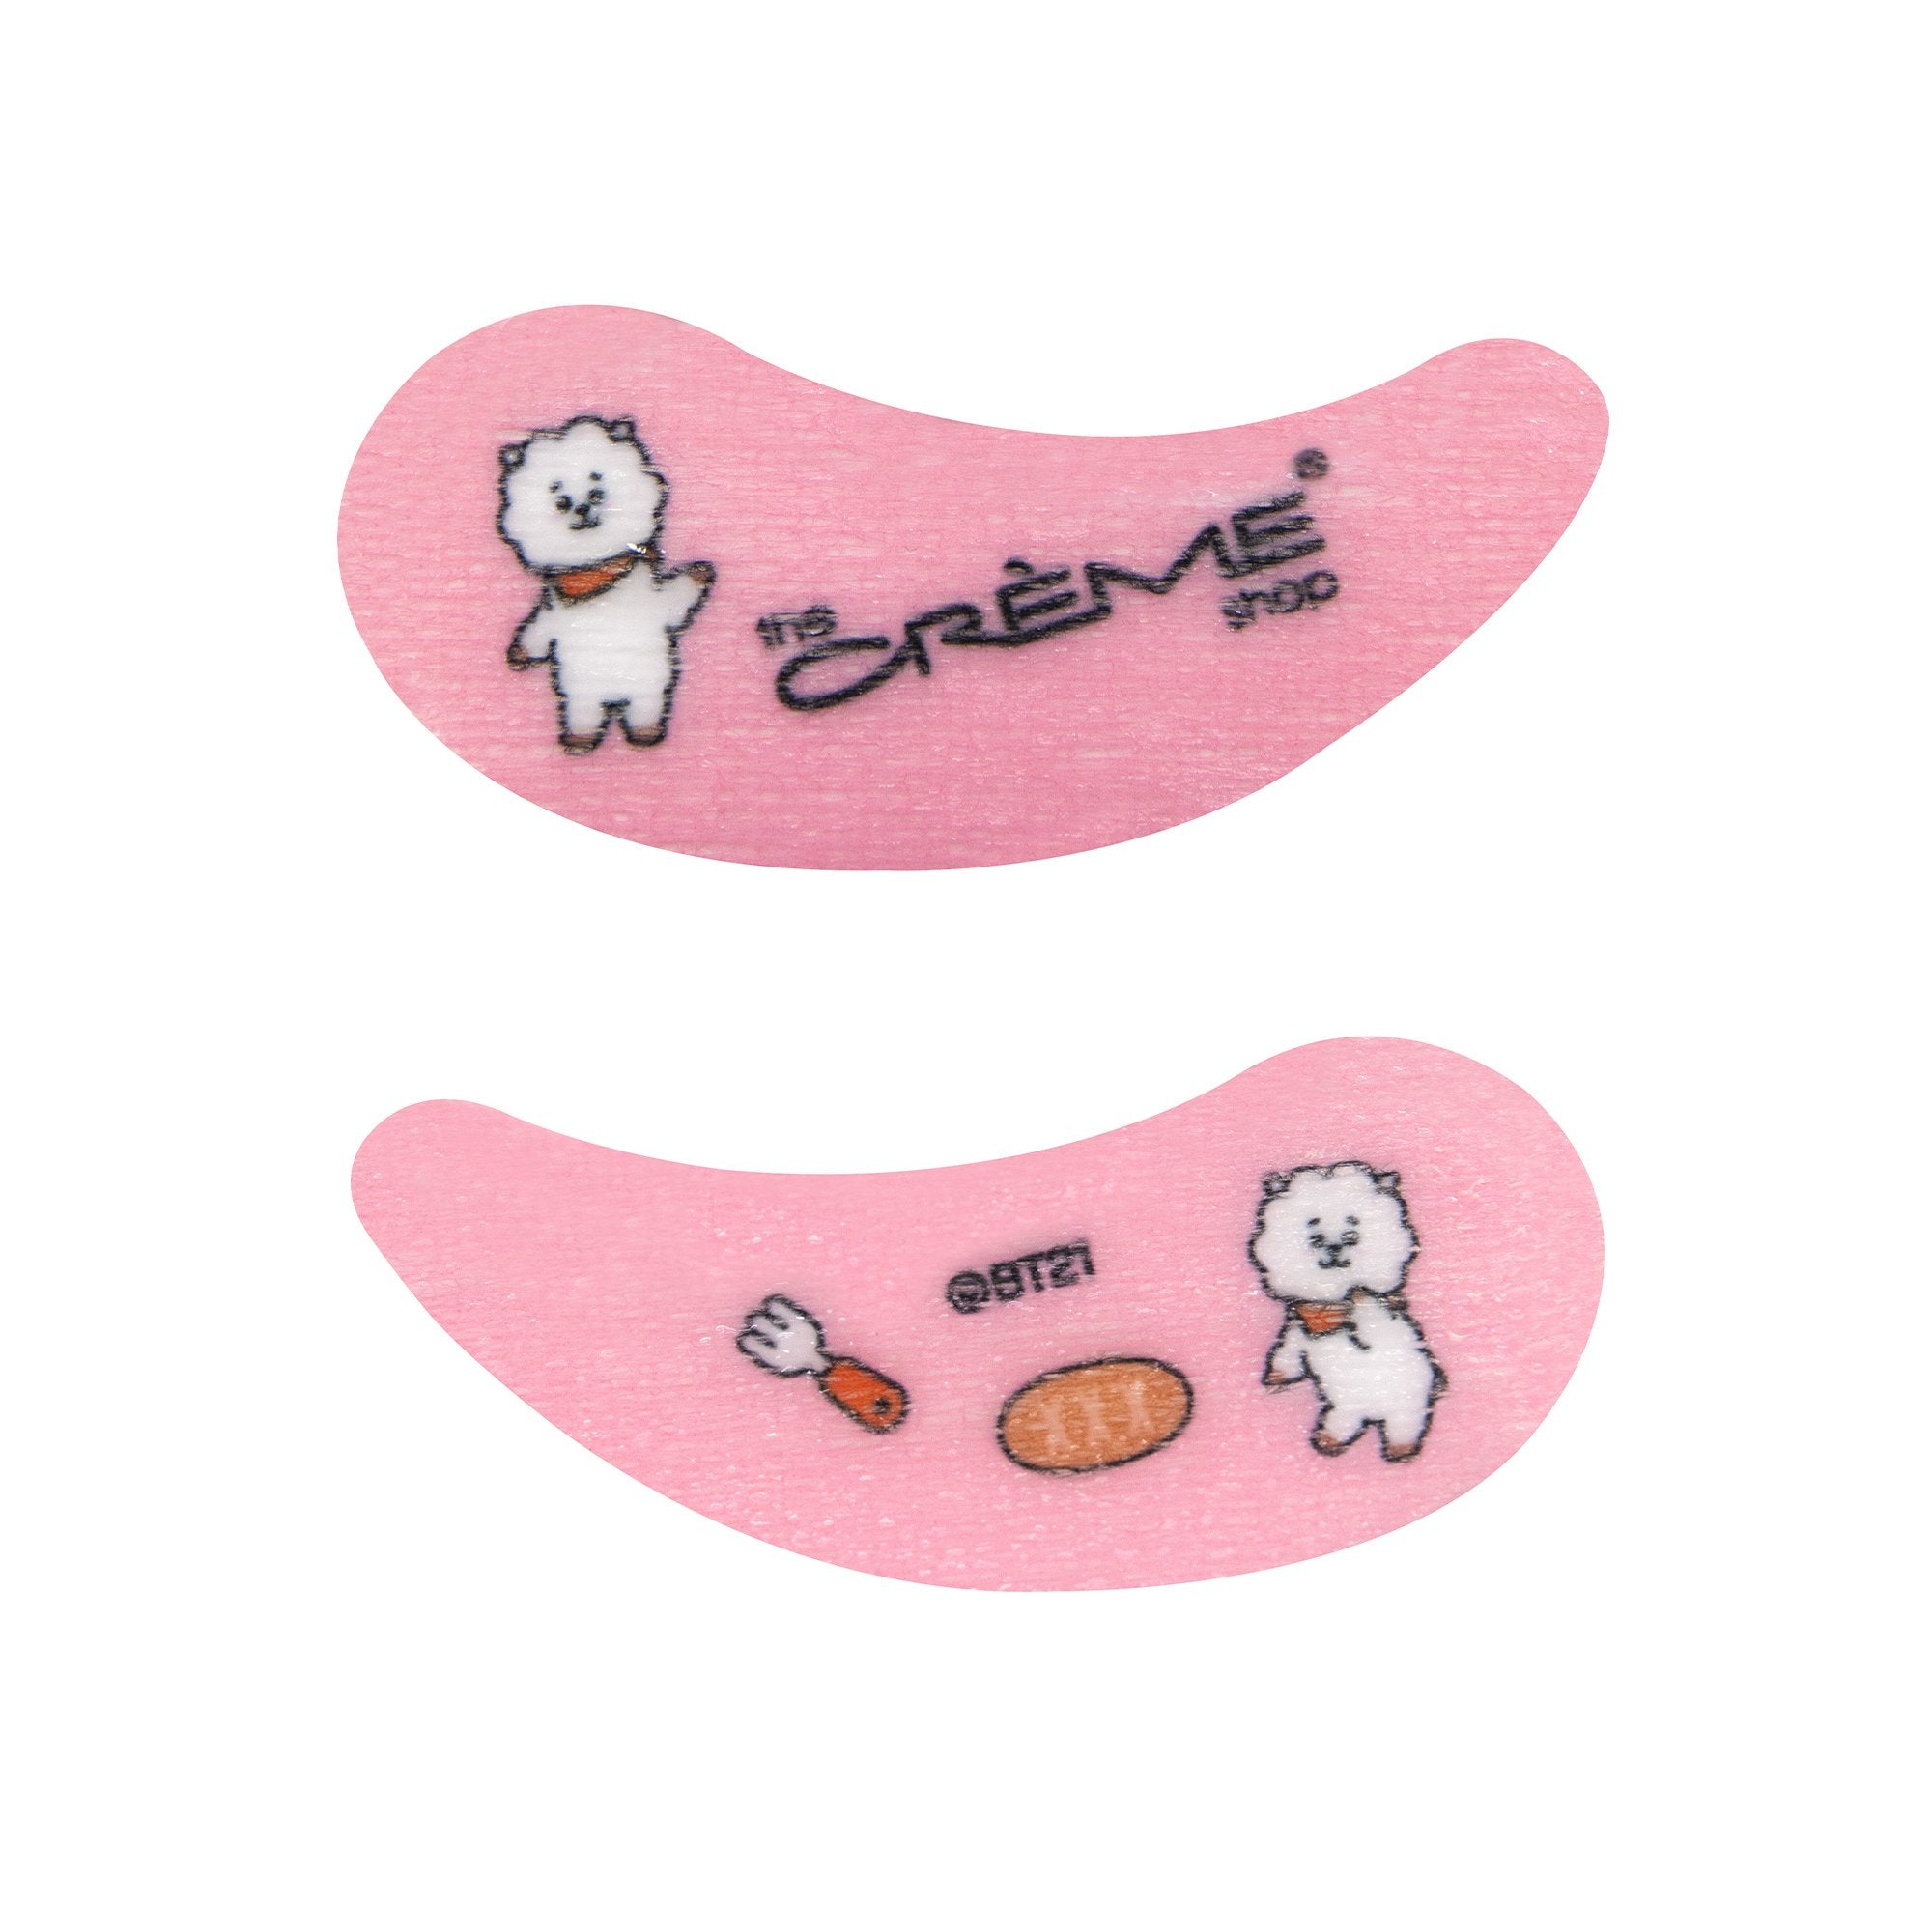 “Gentle Cutie!” RJ Hydrogel Under Eye Patches | Hydrating & Calming Under Eye Patches The Crème Shop x BT21 